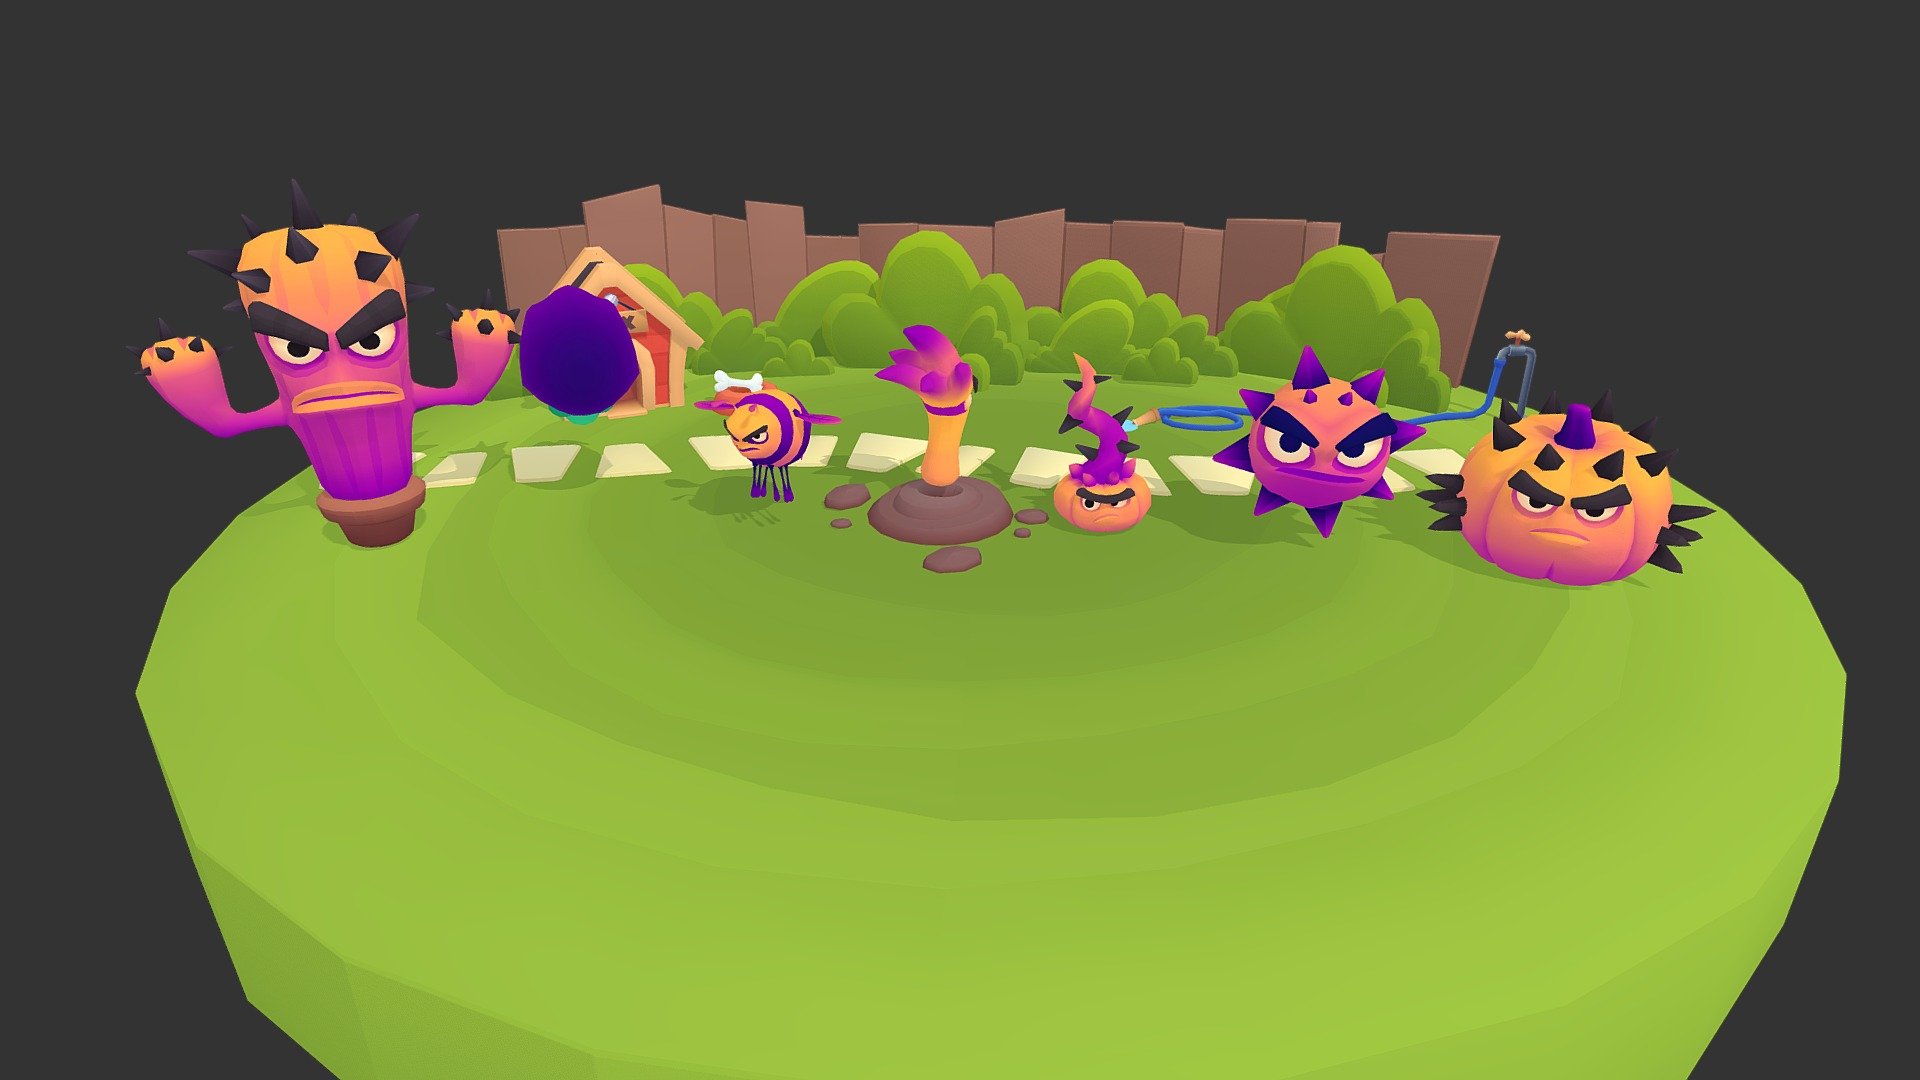 Garden Enemies  for cancelled game we were making in collaboration with Zeptolab, as new title in Cut The Rope universe. Game performed badly in beta tests and it was scraped, so I can show off some stuff I was making for it. I worked on this project with a great artist Krzysztof Szrama. Be sure to check out his portfolio: https://sketchfab.com/arturhorn https://www.artstation.com/arturhorn

Onion, Cactus, Bee animations made by Krzysztof Szrama

Courtesy of Orbital Knight 3d model